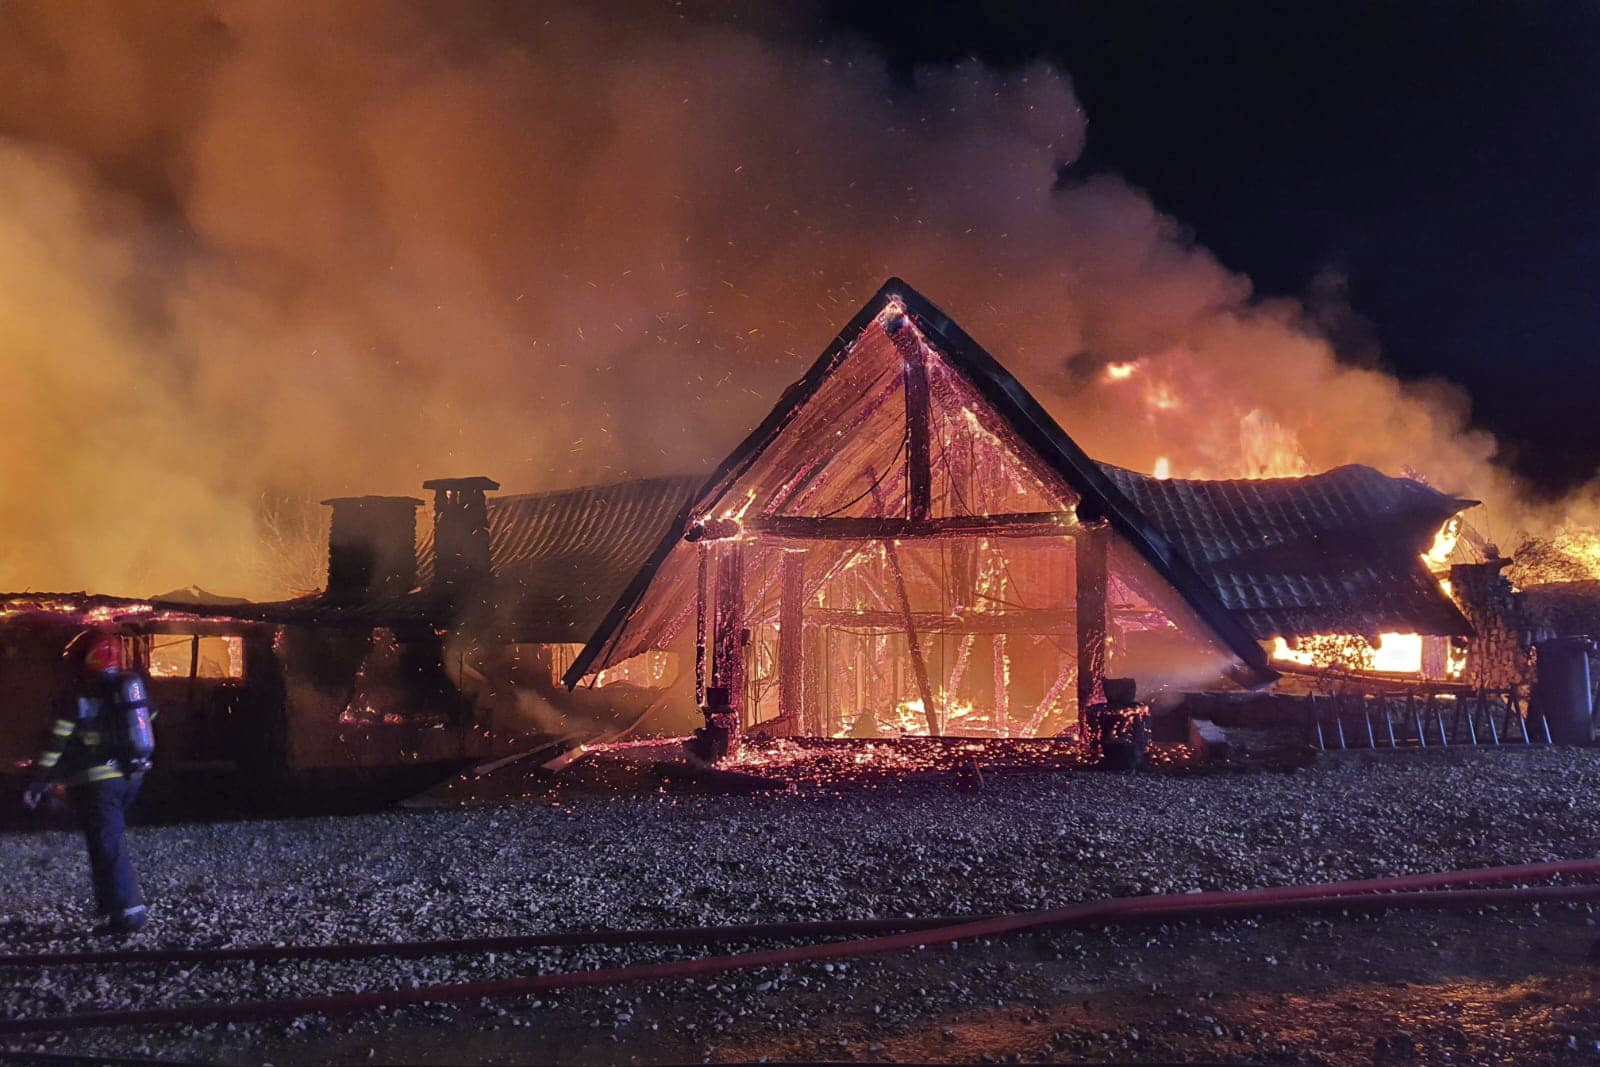 26 people are said to have been at the B&B at the time of the fire